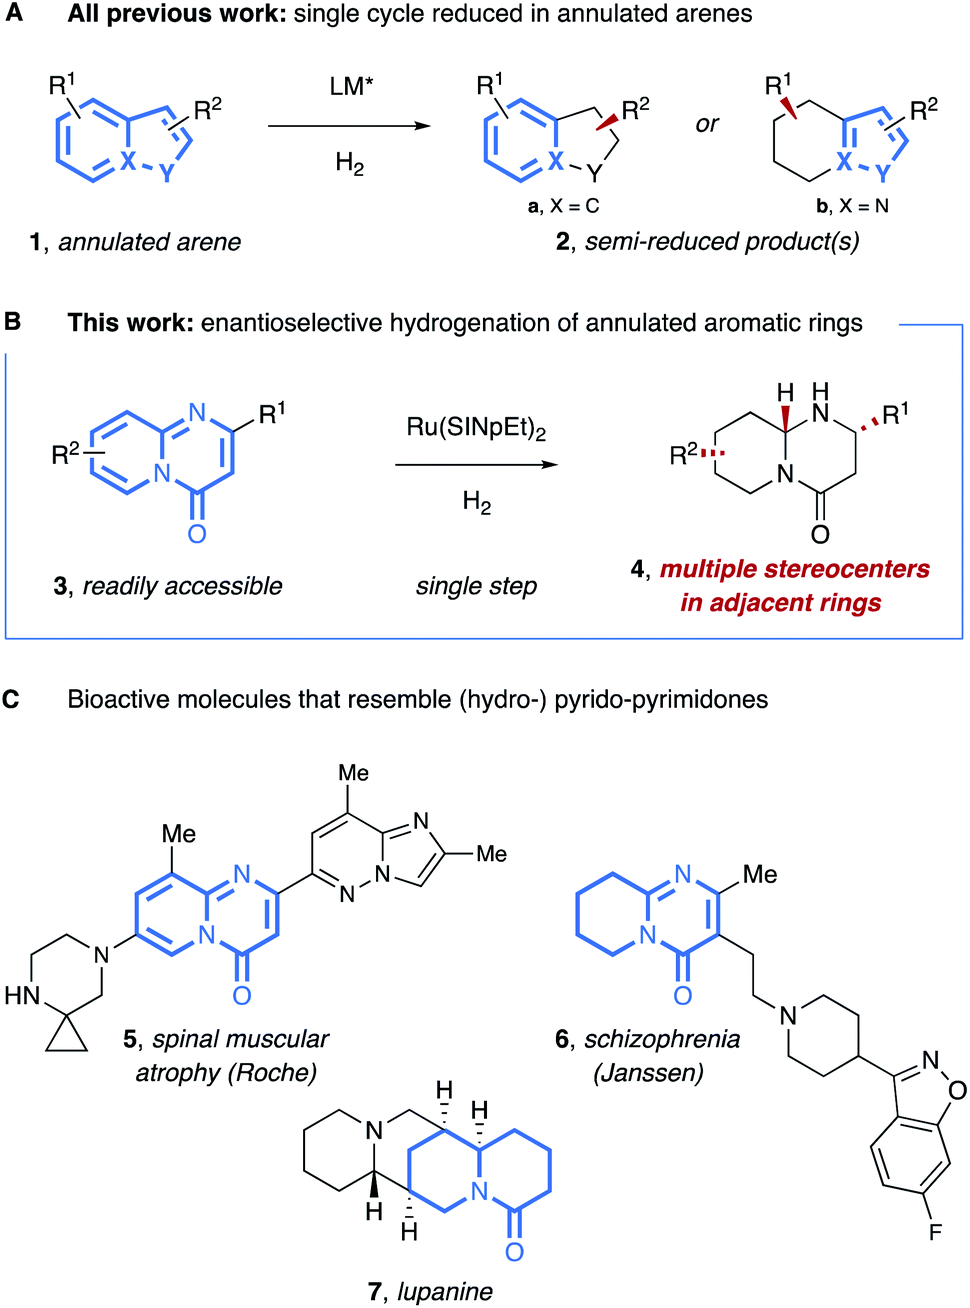 Enantioselective Hydrogenation Of Annulated Arenes Controlled Formation Of Multiple Stereocenters In Adjacent Rings Chemical Science Rsc Publishing Doi 10 1039 D0sch